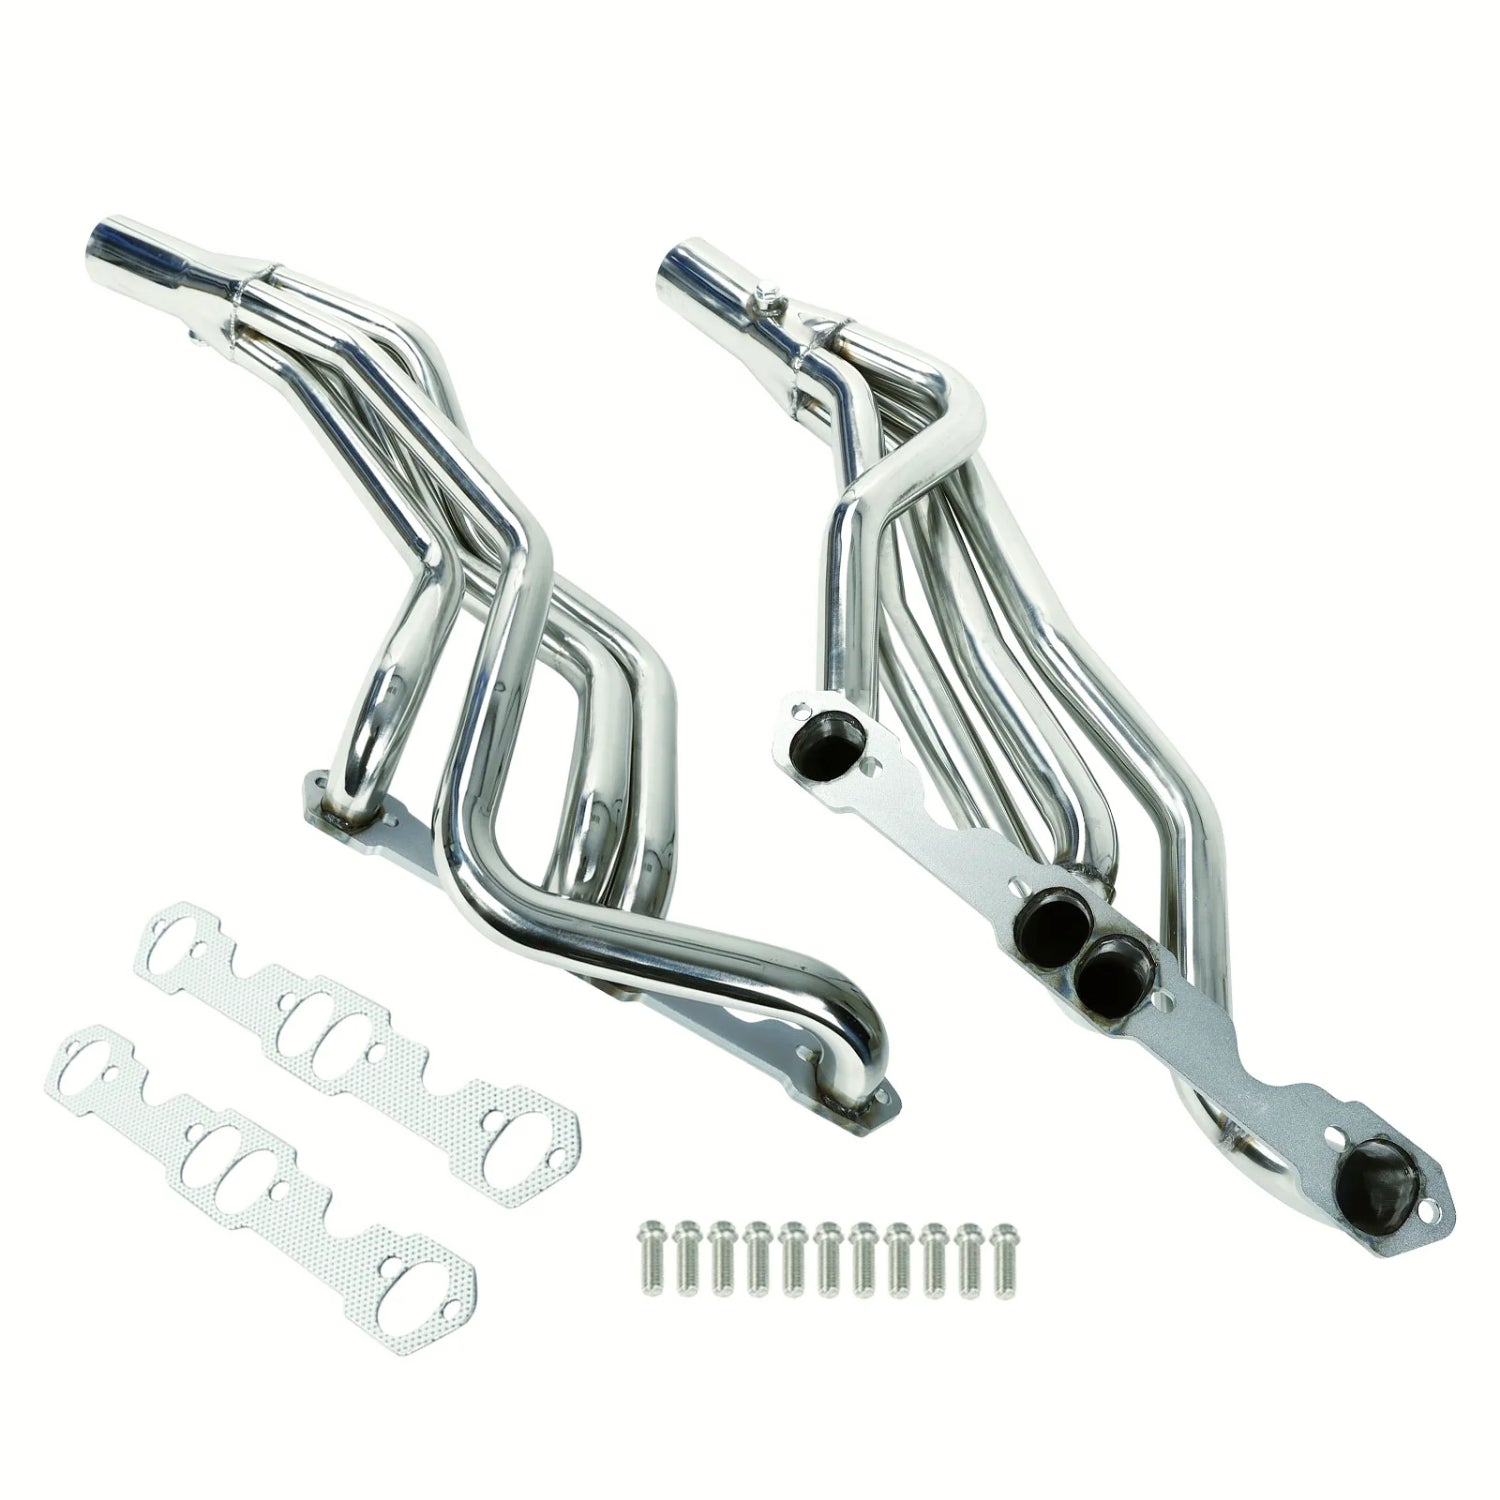 Stainless Exhaust Headers Manifold for 1993-1997 Chevy Camaro/Firebird 5.7L LT1 V8